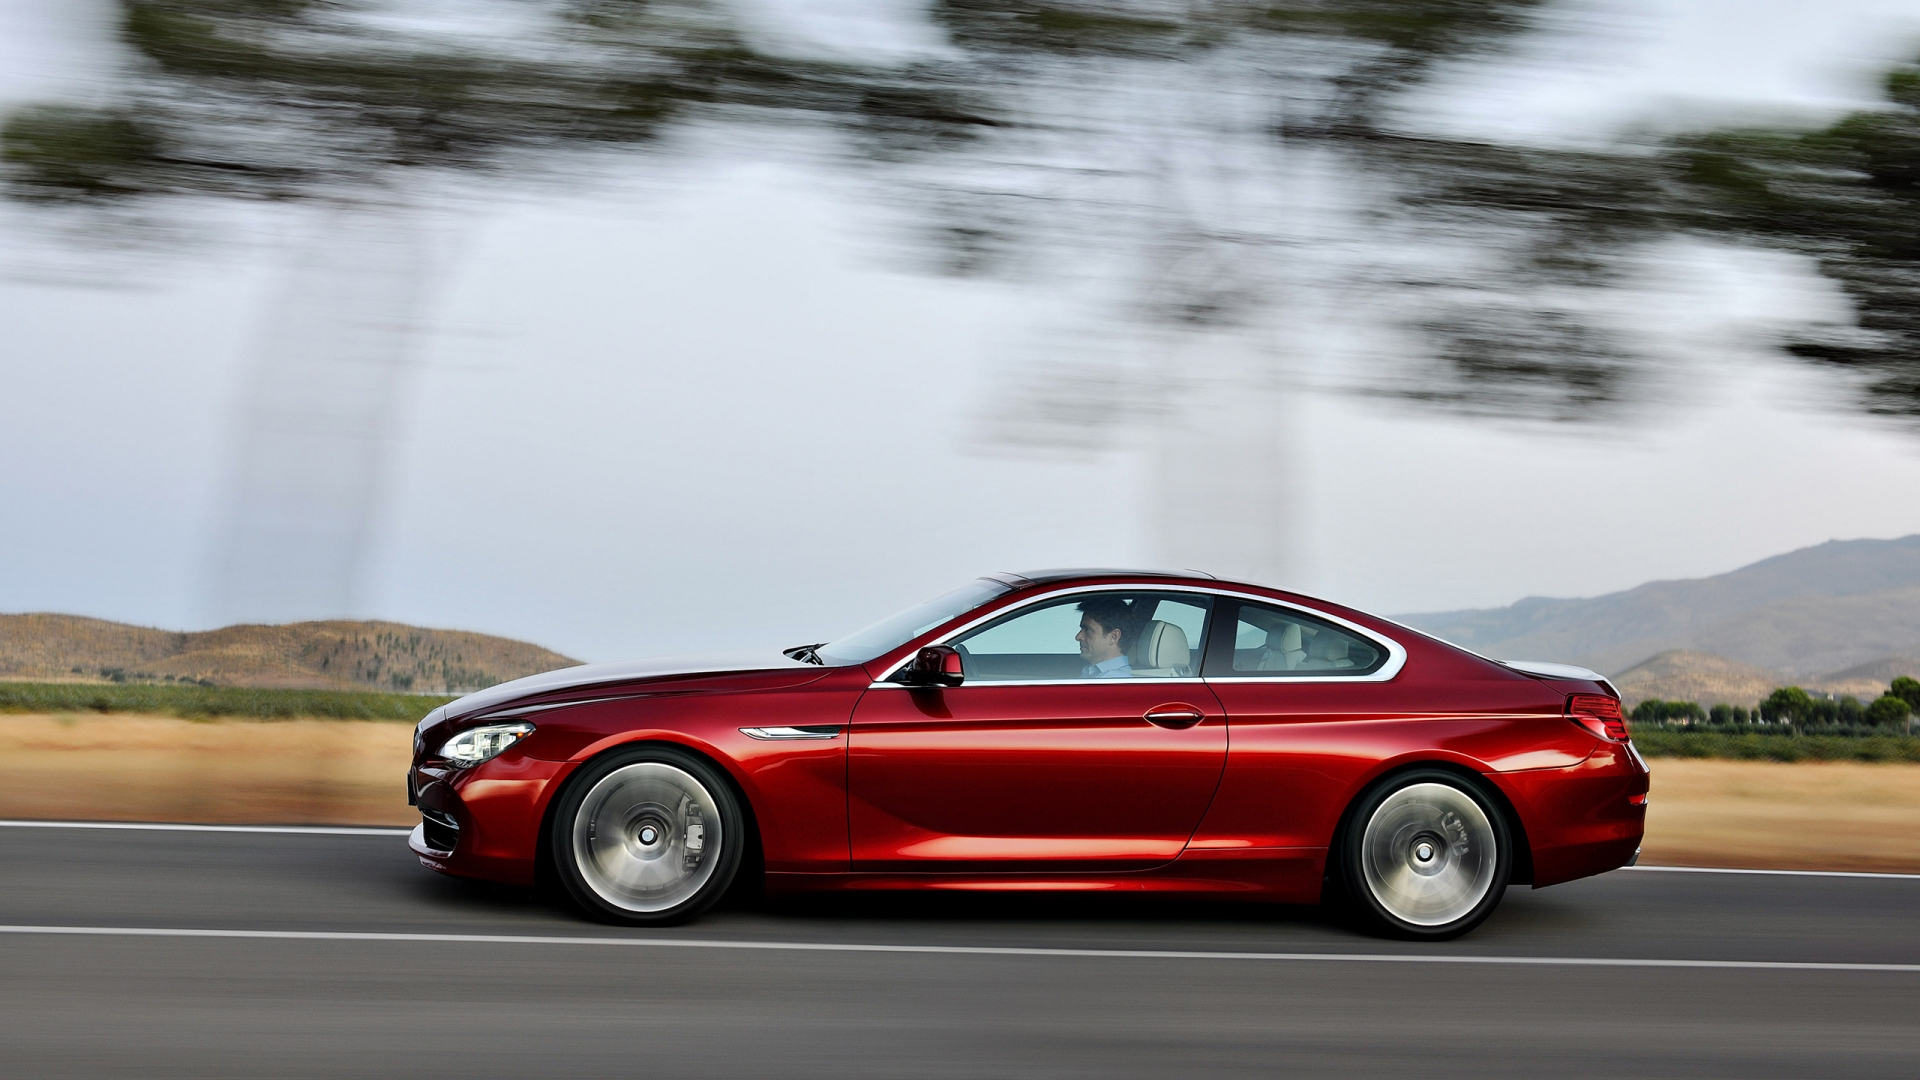 BMW 650i Coupe 2012 for 1920 x 1080 HDTV 1080p resolution